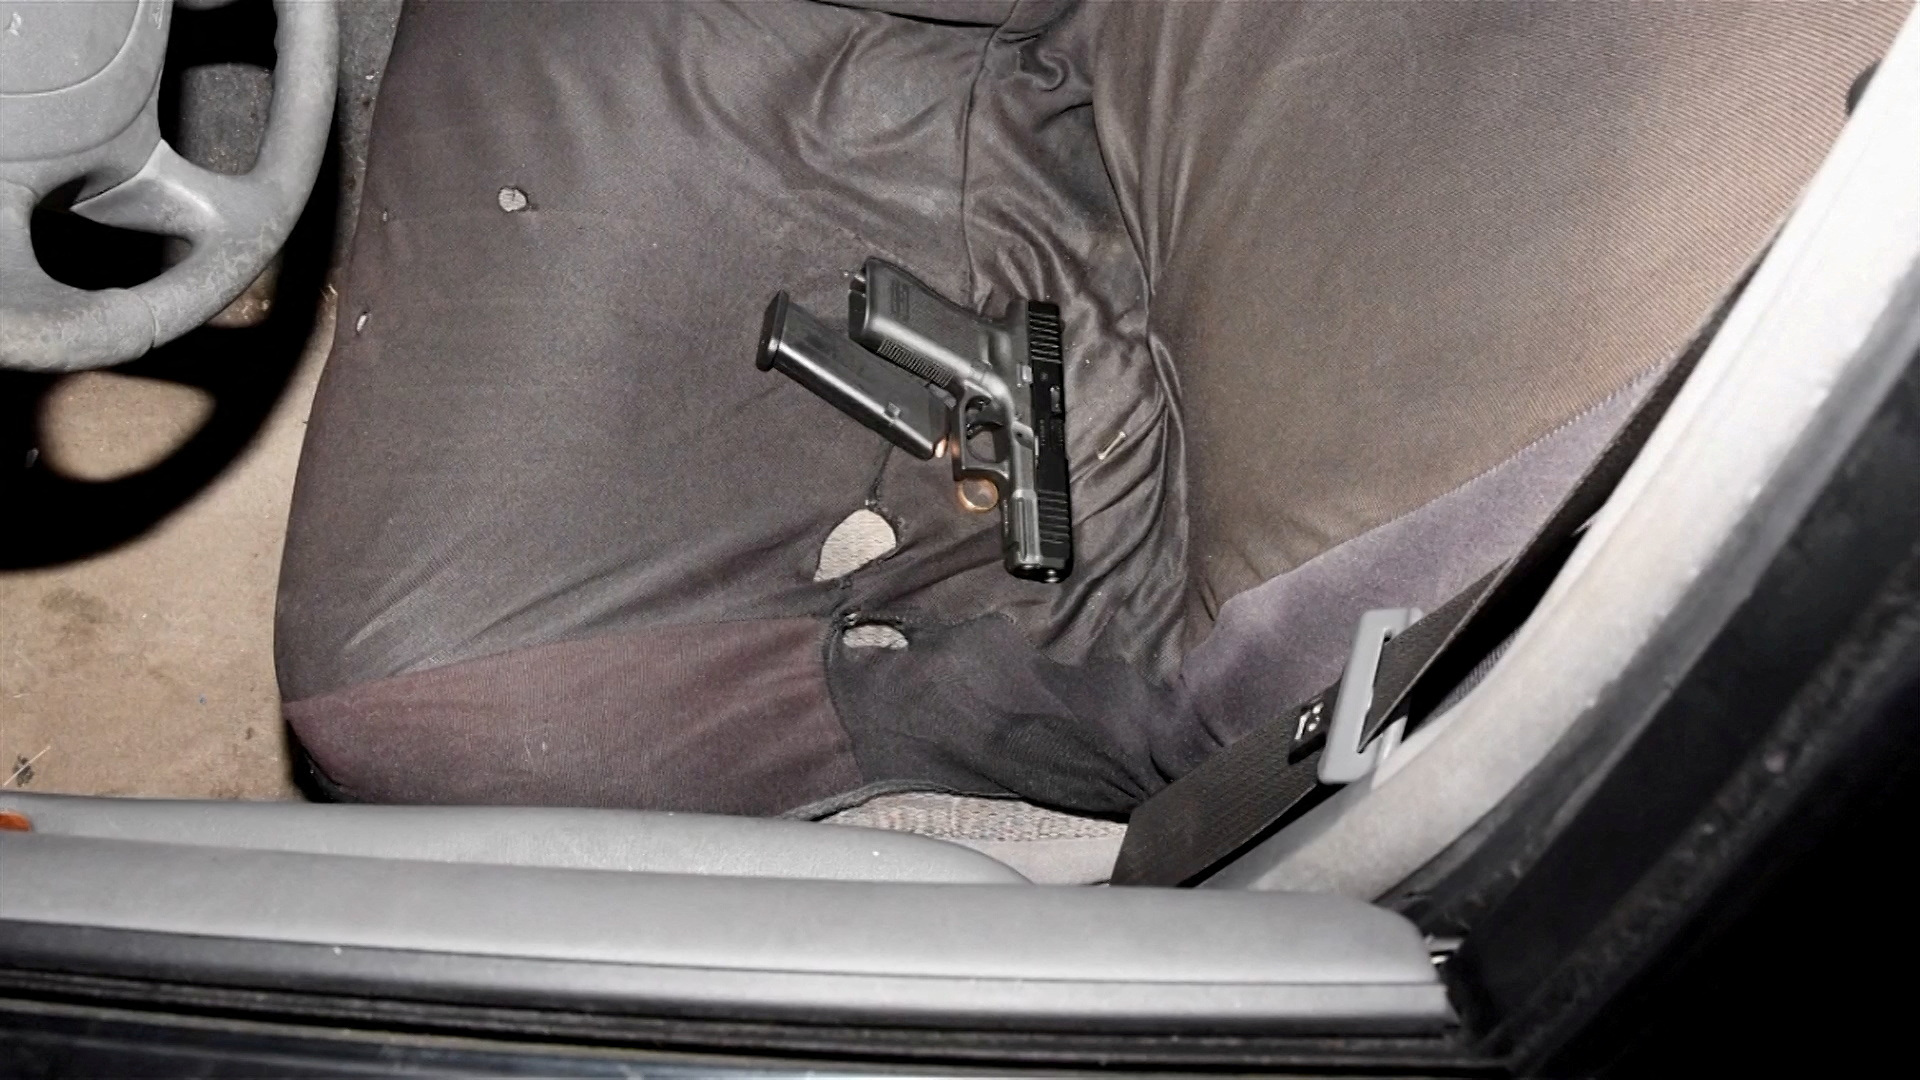 A handgun, loaded magazine and a gold ring are seen on the front seat of the vehicle of Jayland Walker in Akron, Ohio, U.S. June 27, 2022 in a still image from a police video presentation. City of Akron/Handout via REUTERS